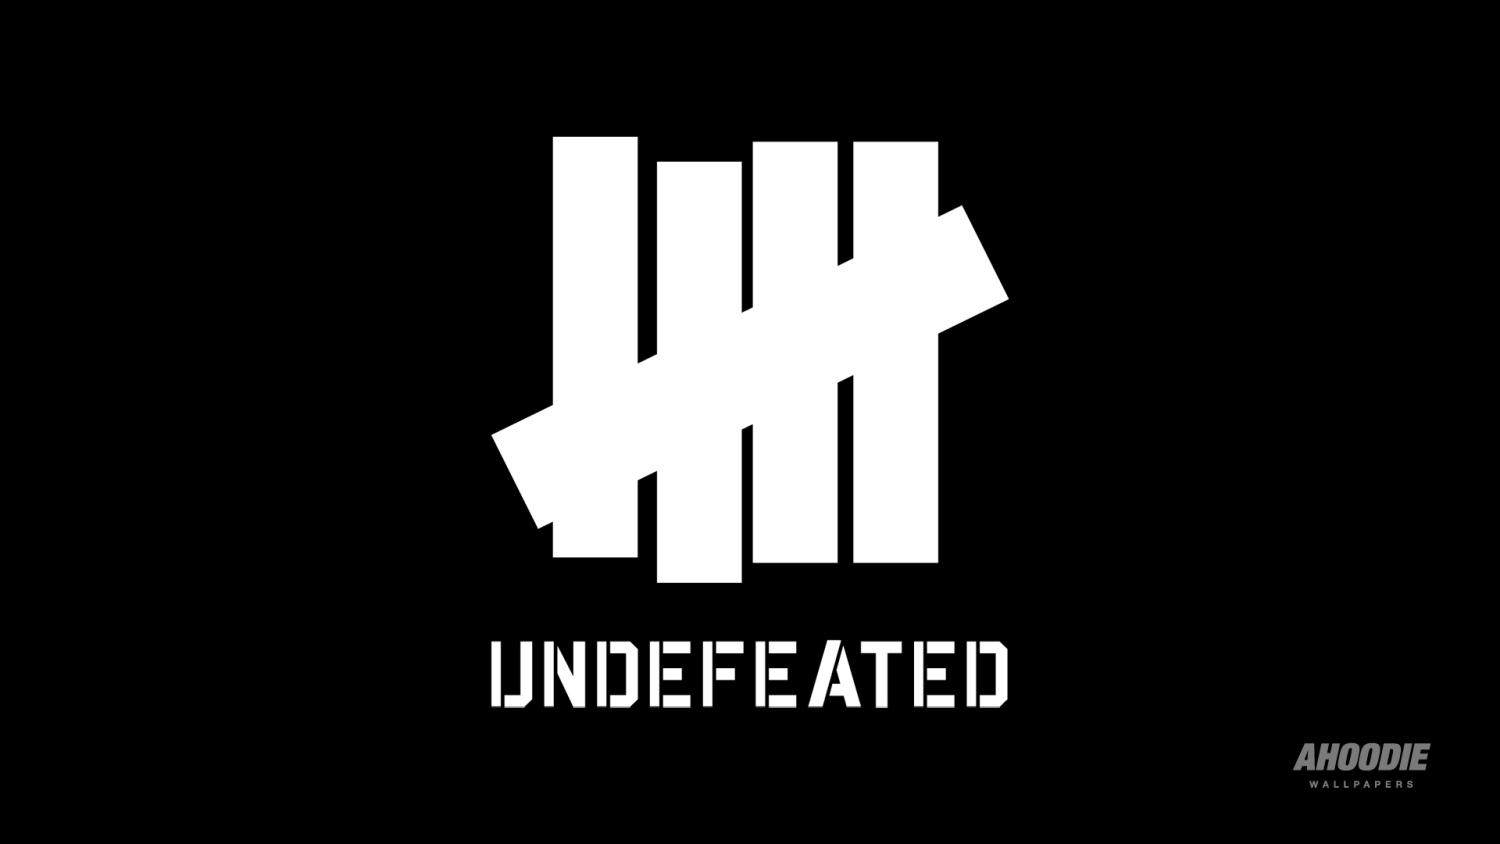 Undefeated wallpaper